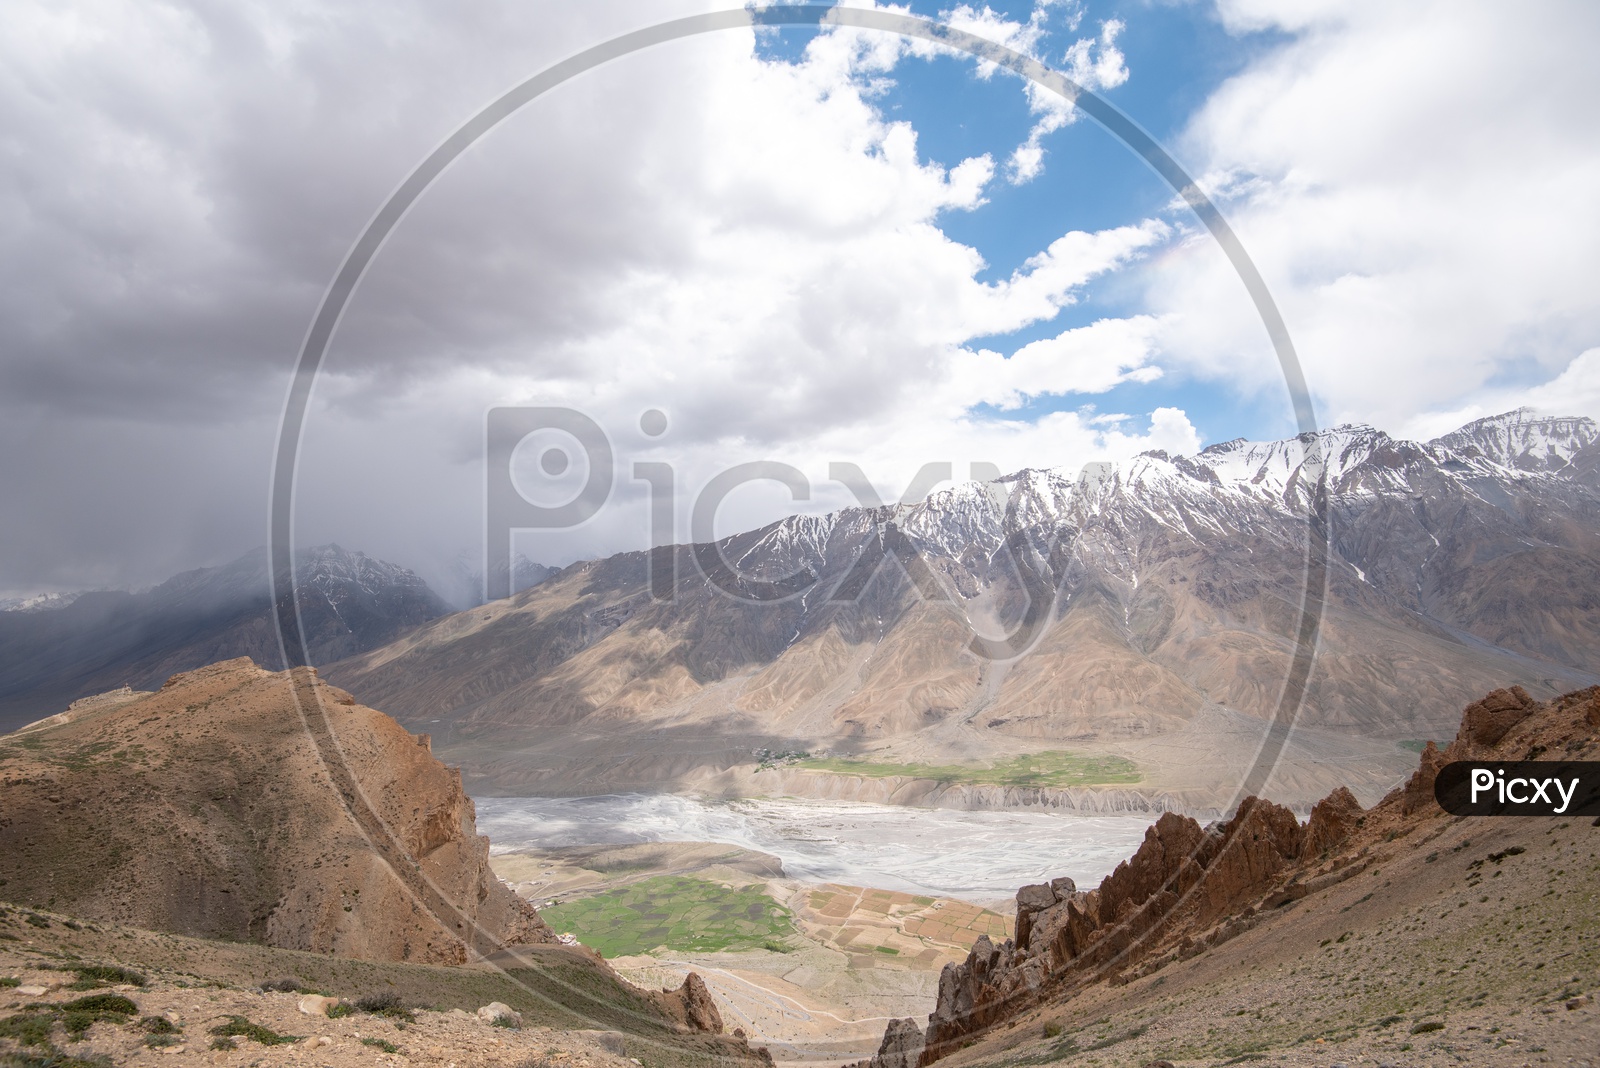 River in Spiti Valley with snow clad mountains in the background